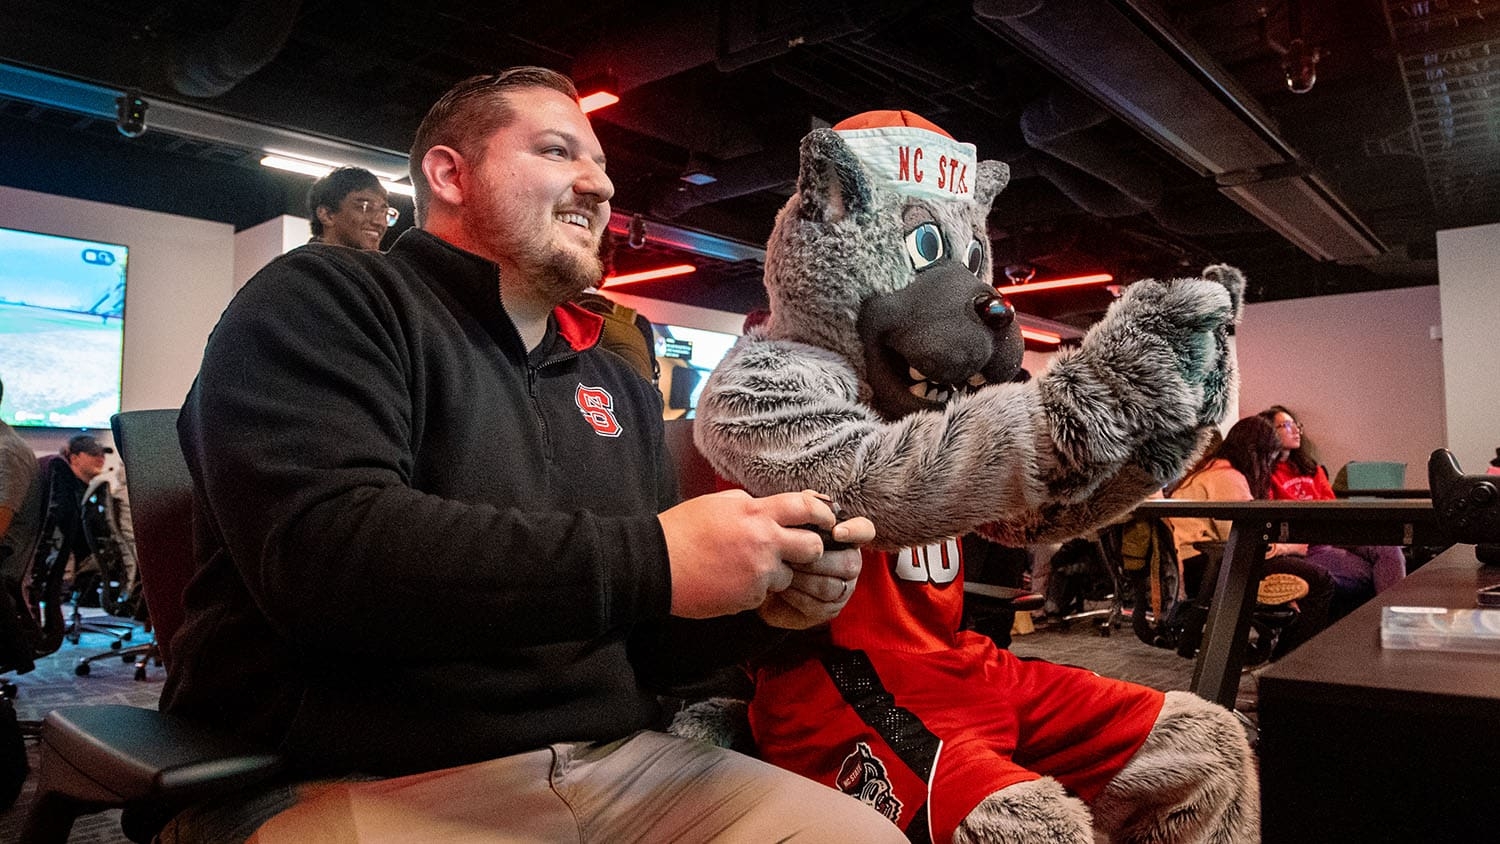 NC State Esports Program Director Cody Elsen plays a game alongside Mr. Wuf in the NC State Gaming and Esports Lab.